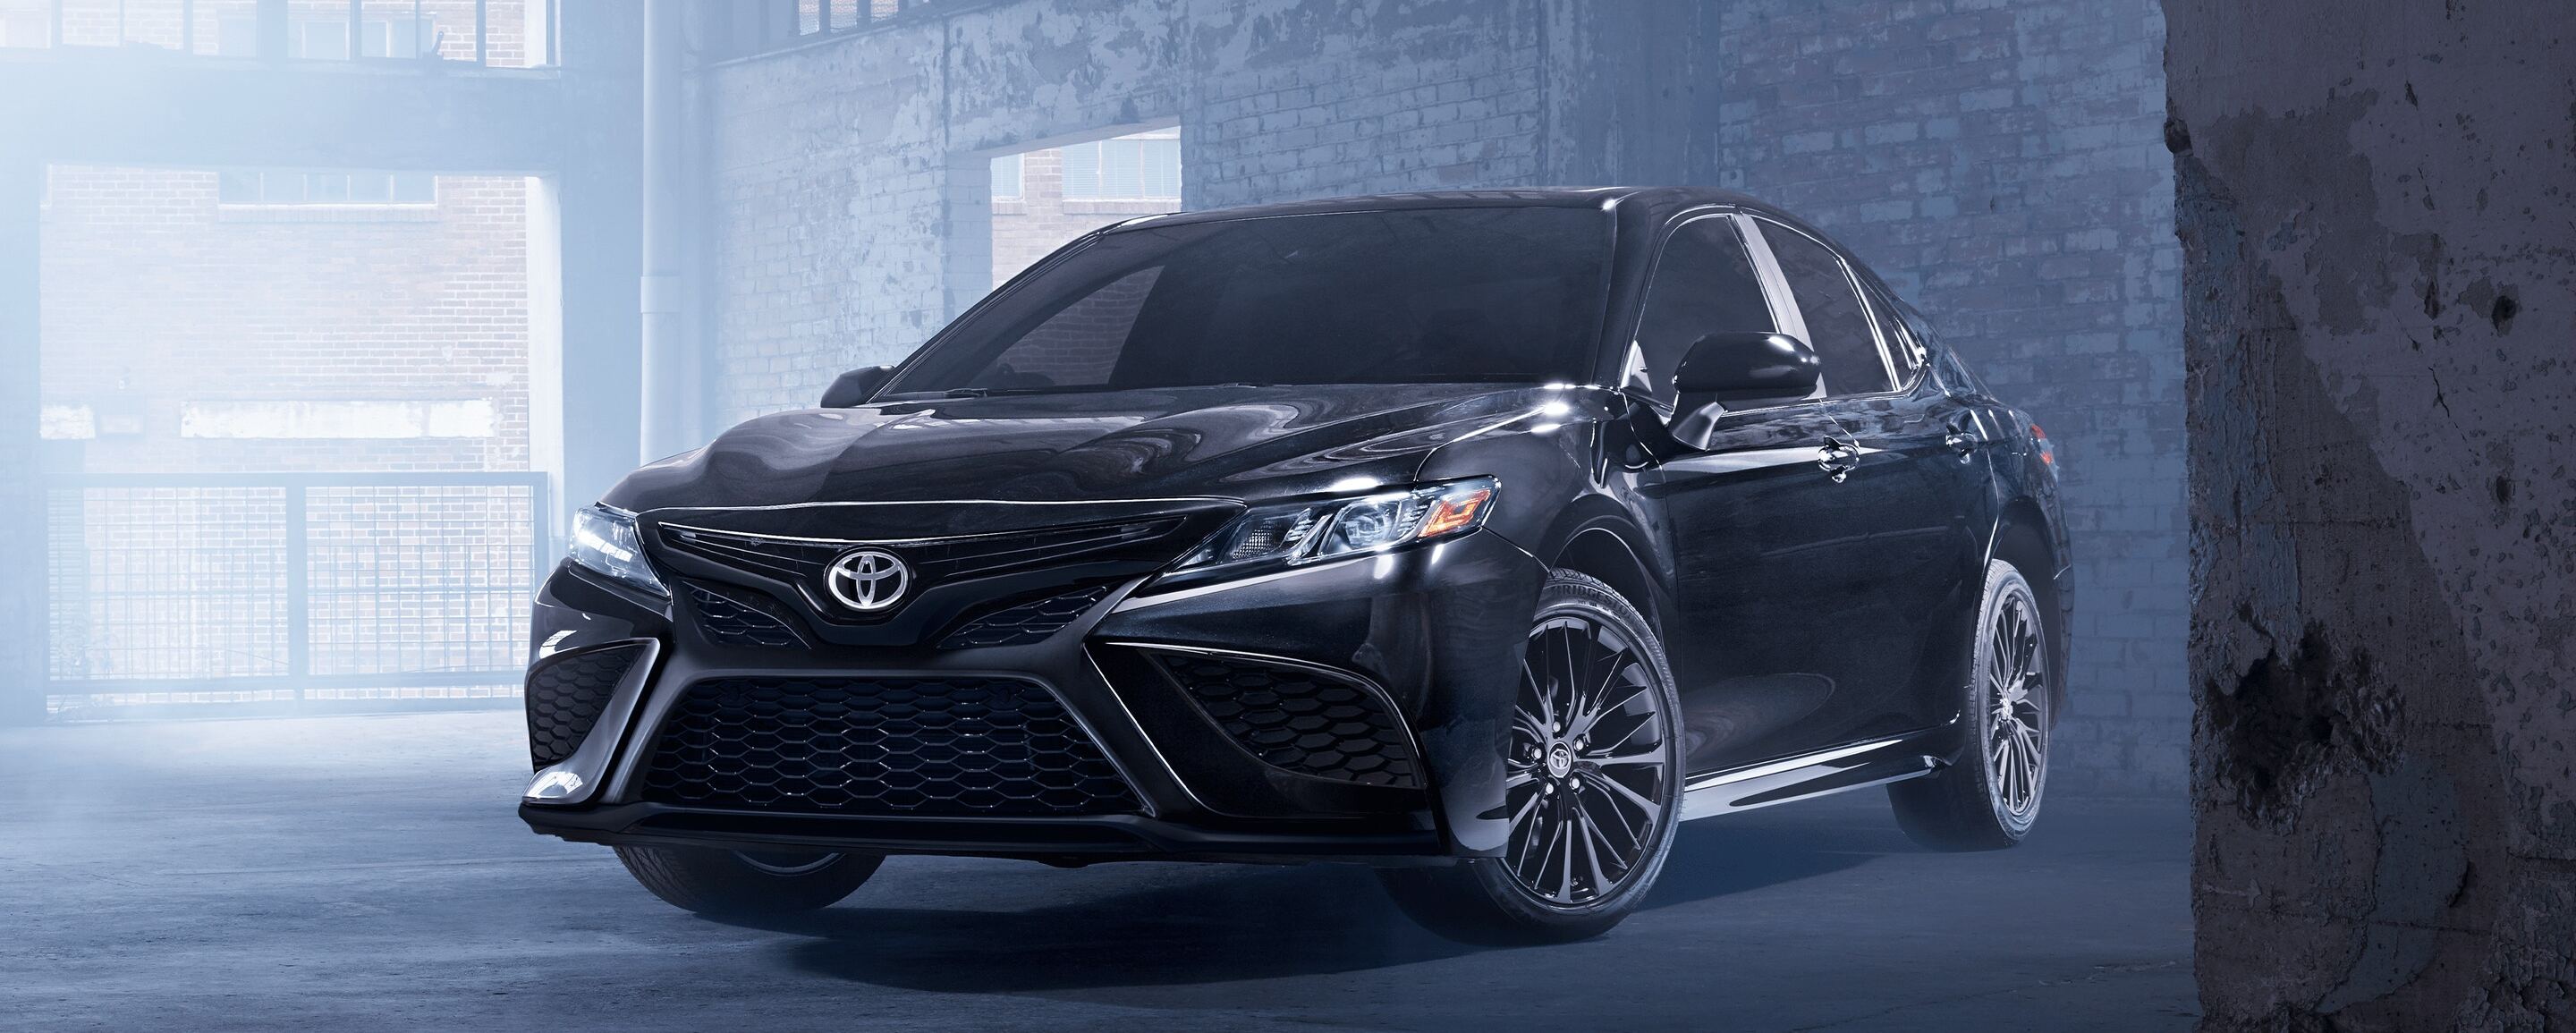 2022 Toyota Camry Lease near Perrysburg, OH